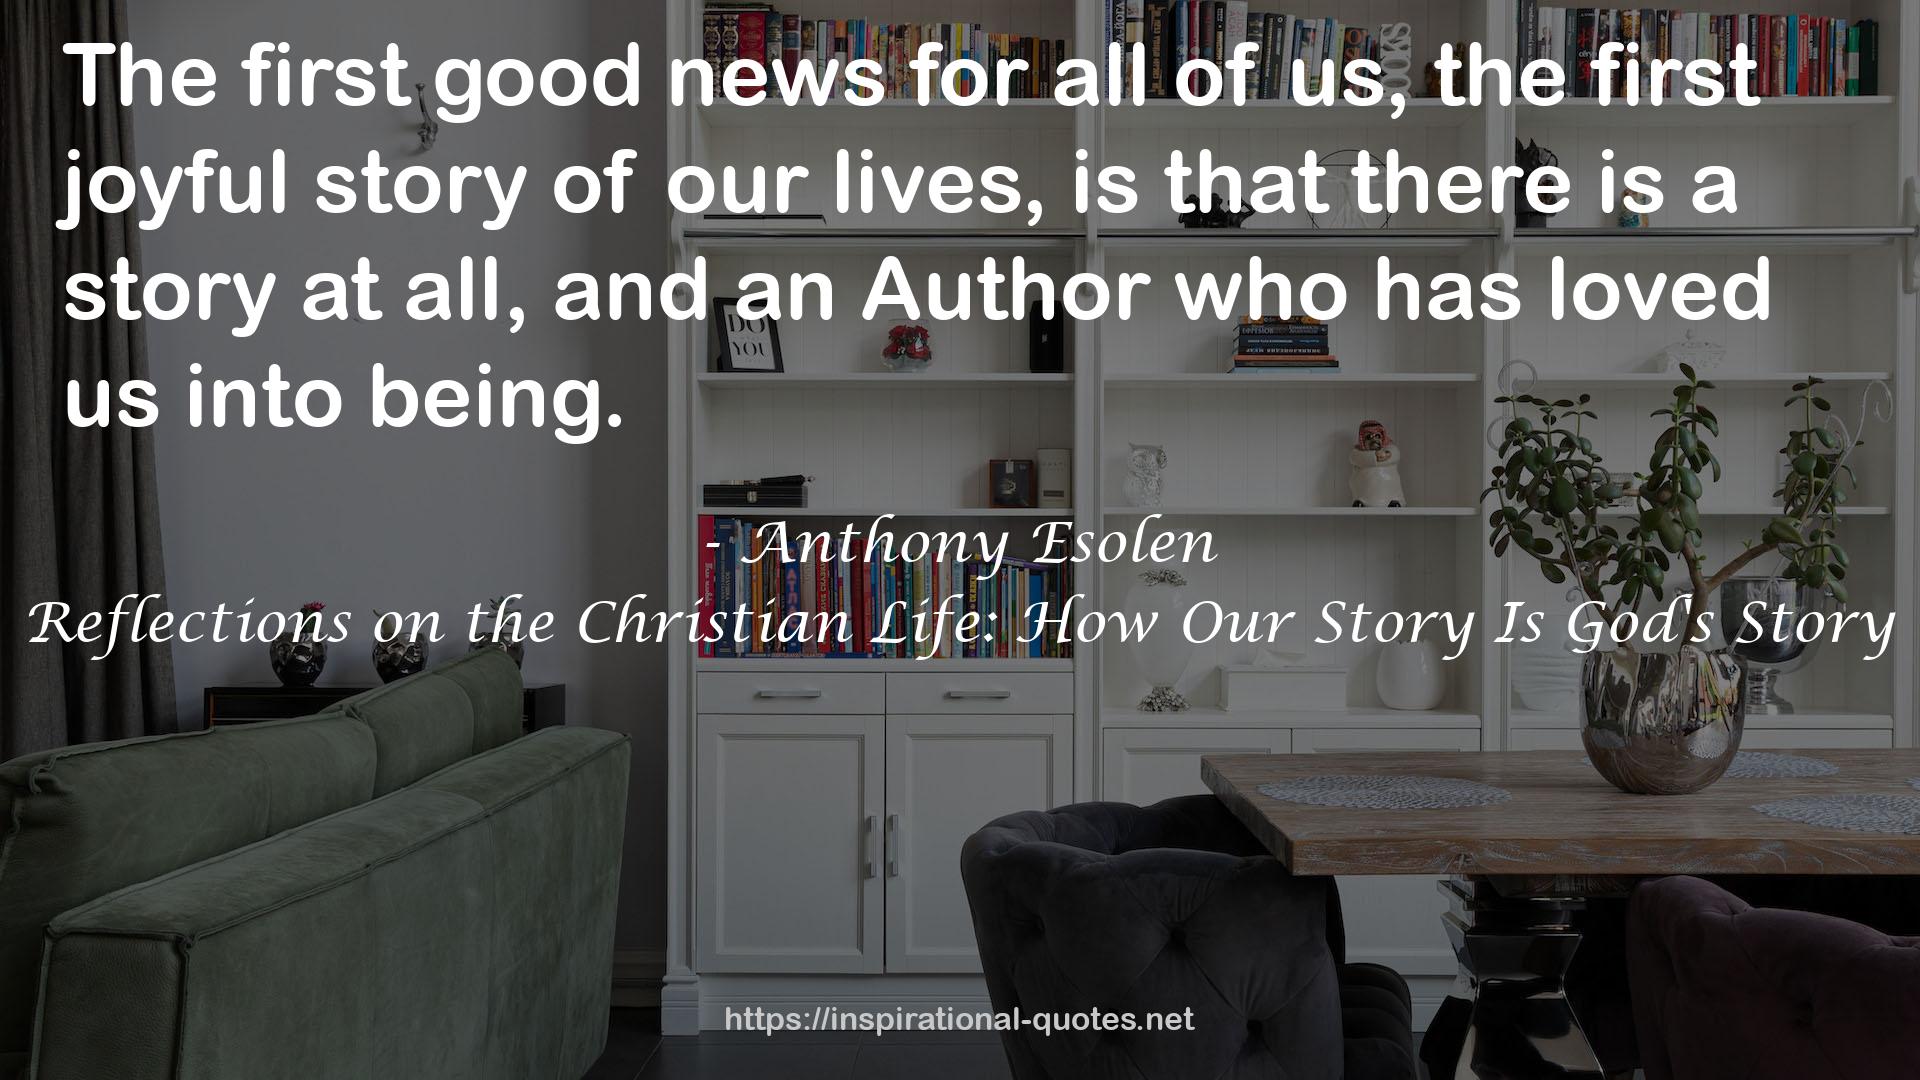 Reflections on the Christian Life: How Our Story Is God's Story QUOTES